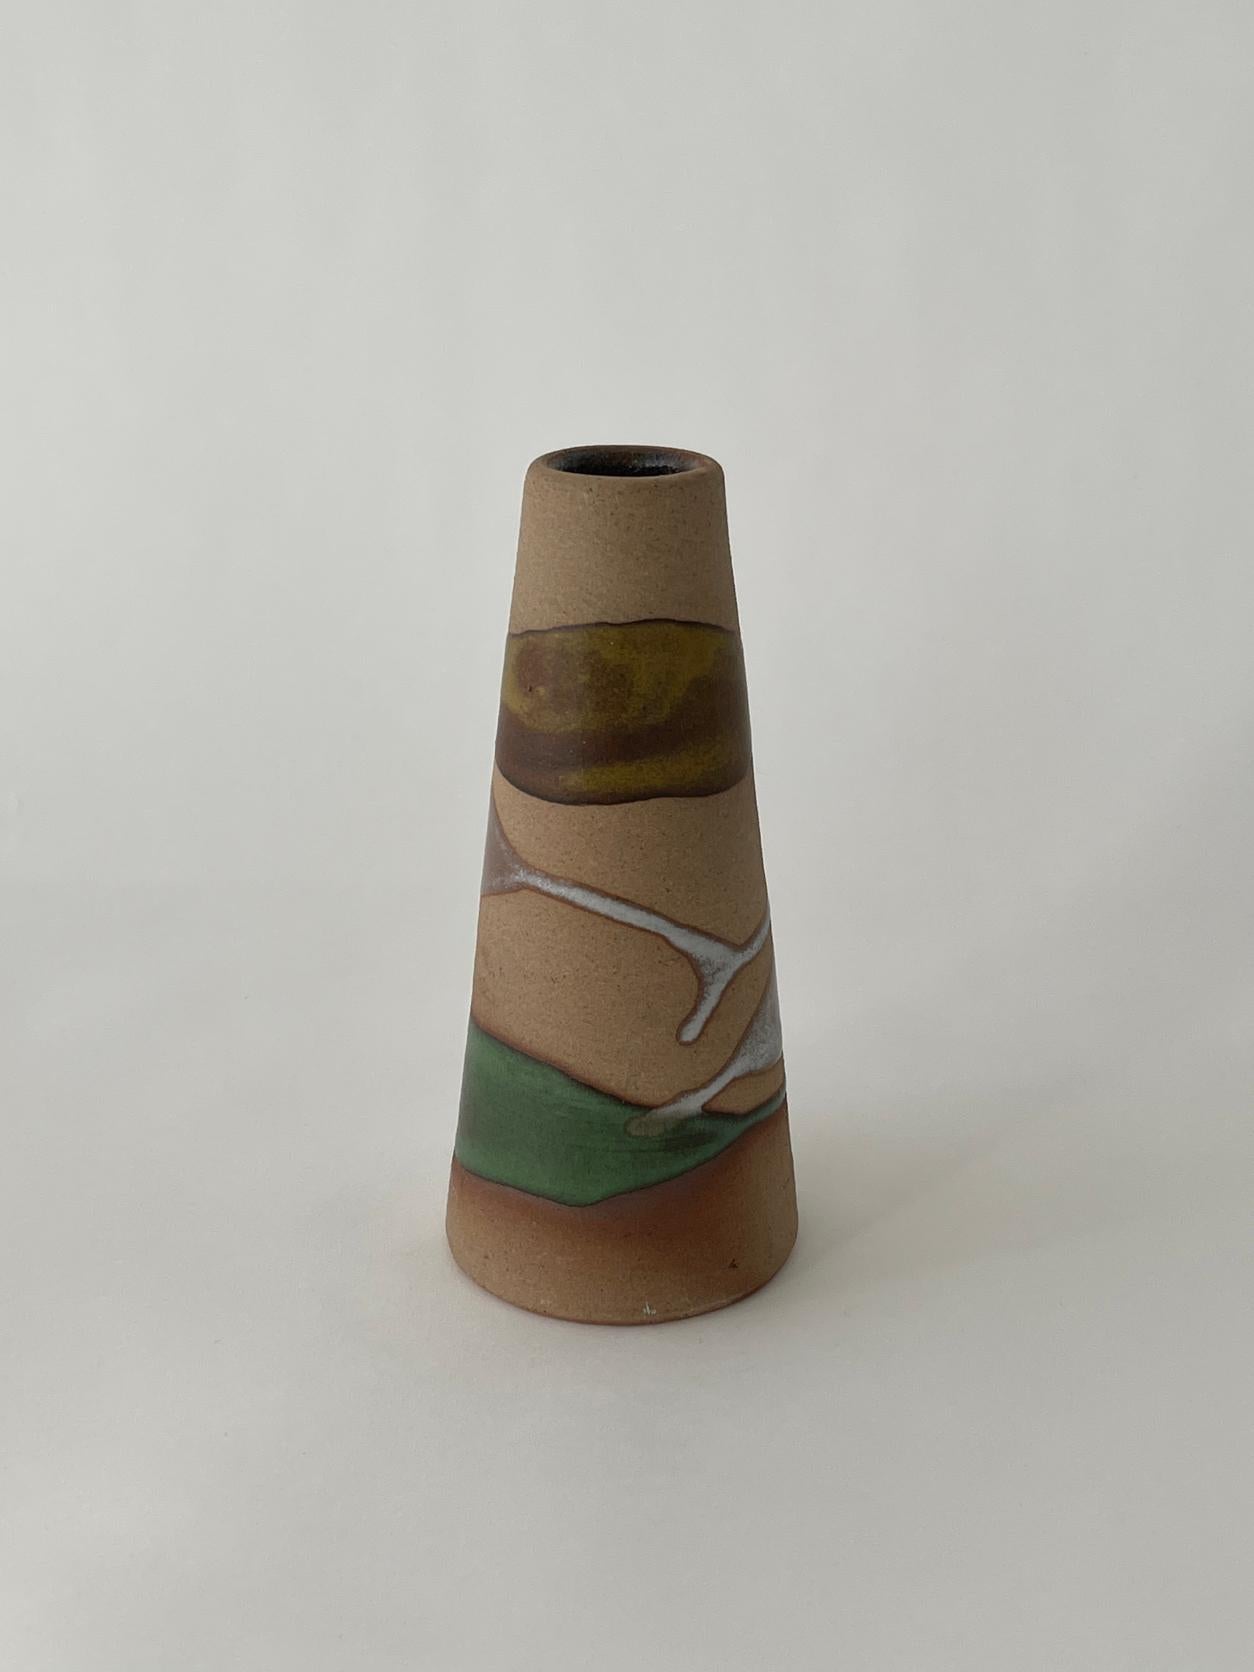 Hand-Crafted 20th Century Textured and Glazed Vessel For Sale